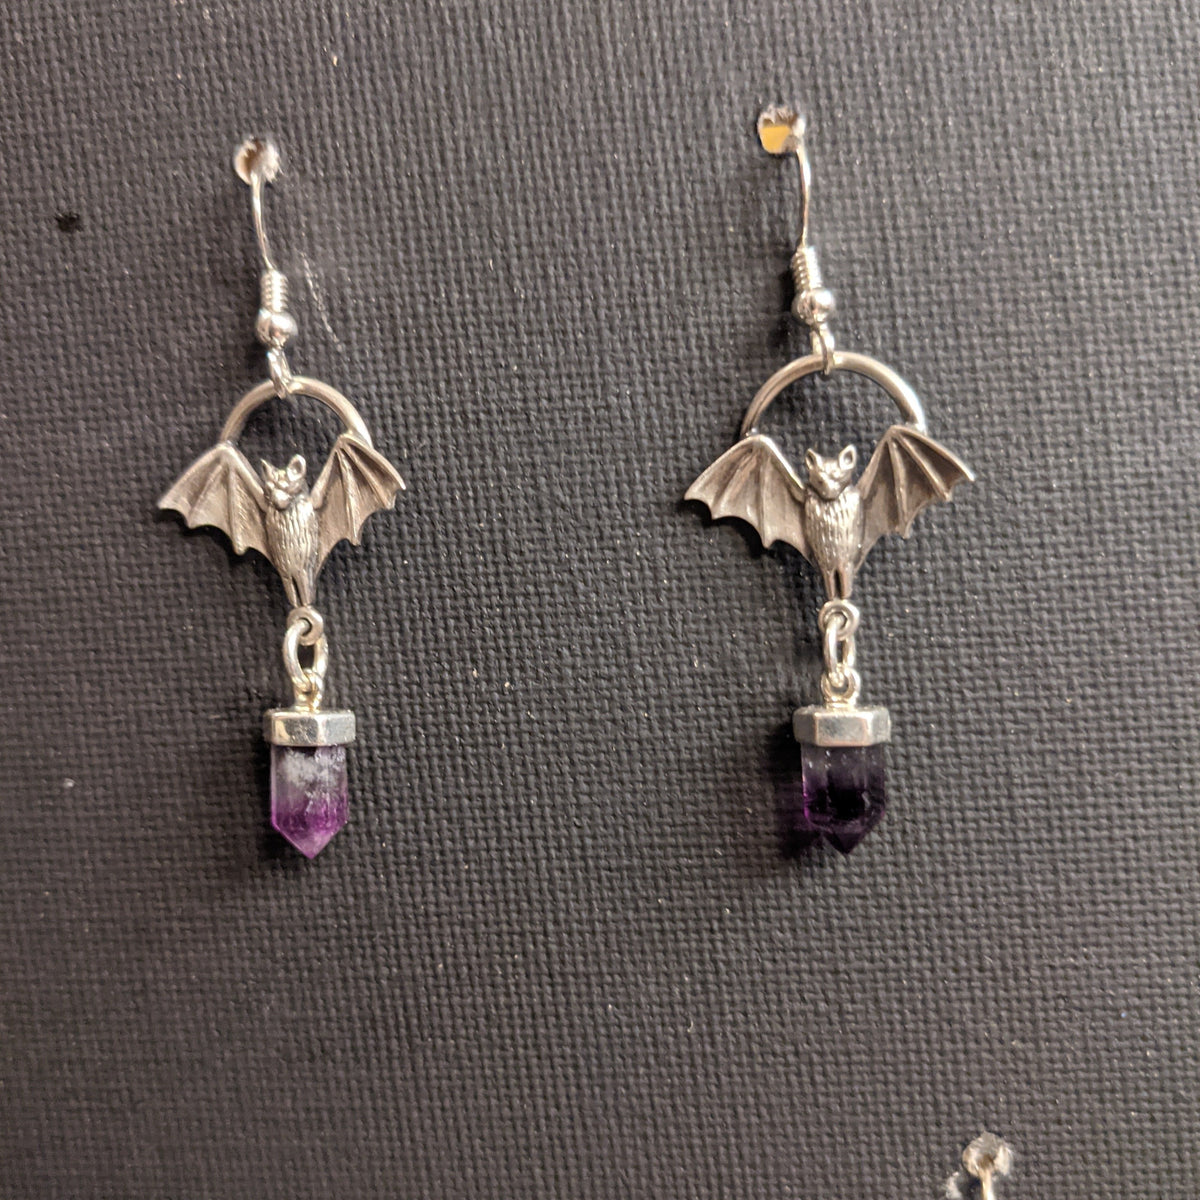 Bats with Flourite Crystal Point Earrings